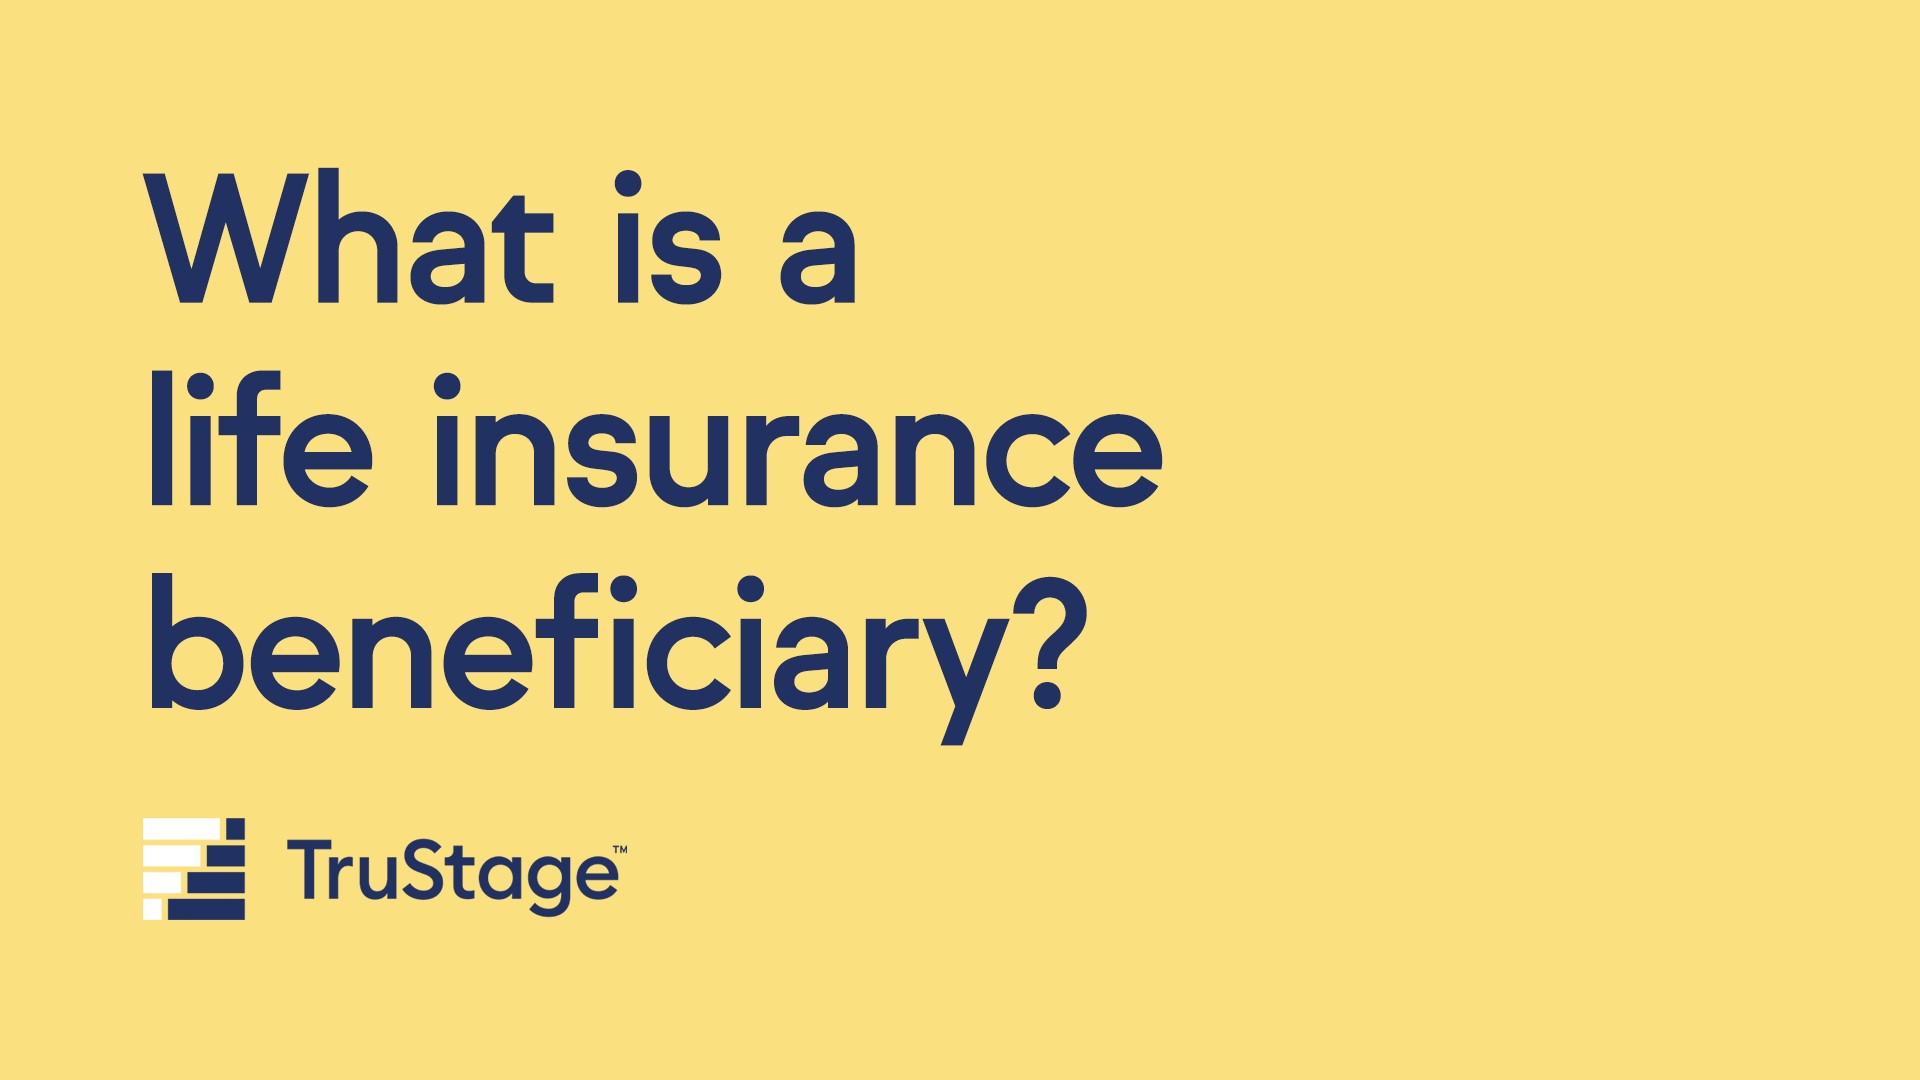 What is a life insurance beneficiary?